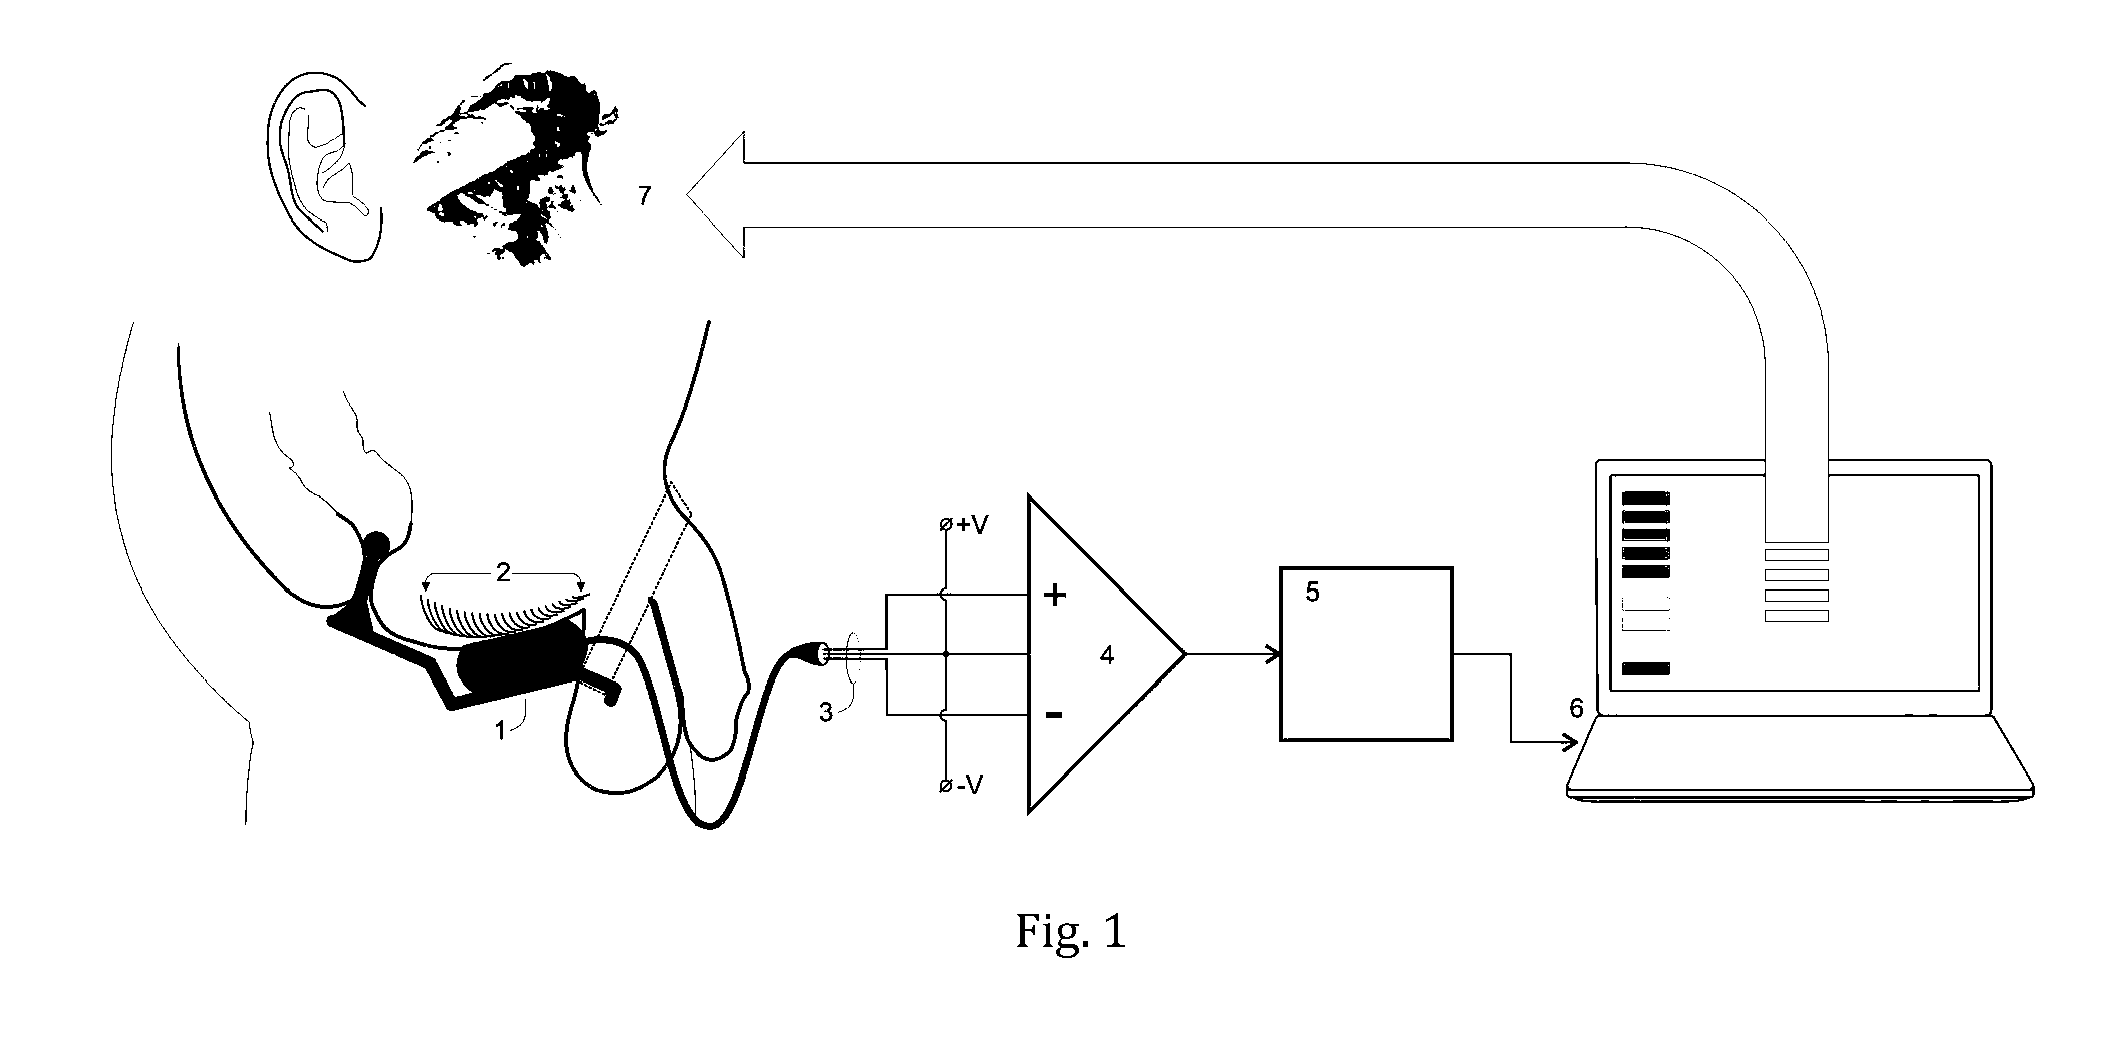 Device, system and method for improving erectile functions in males